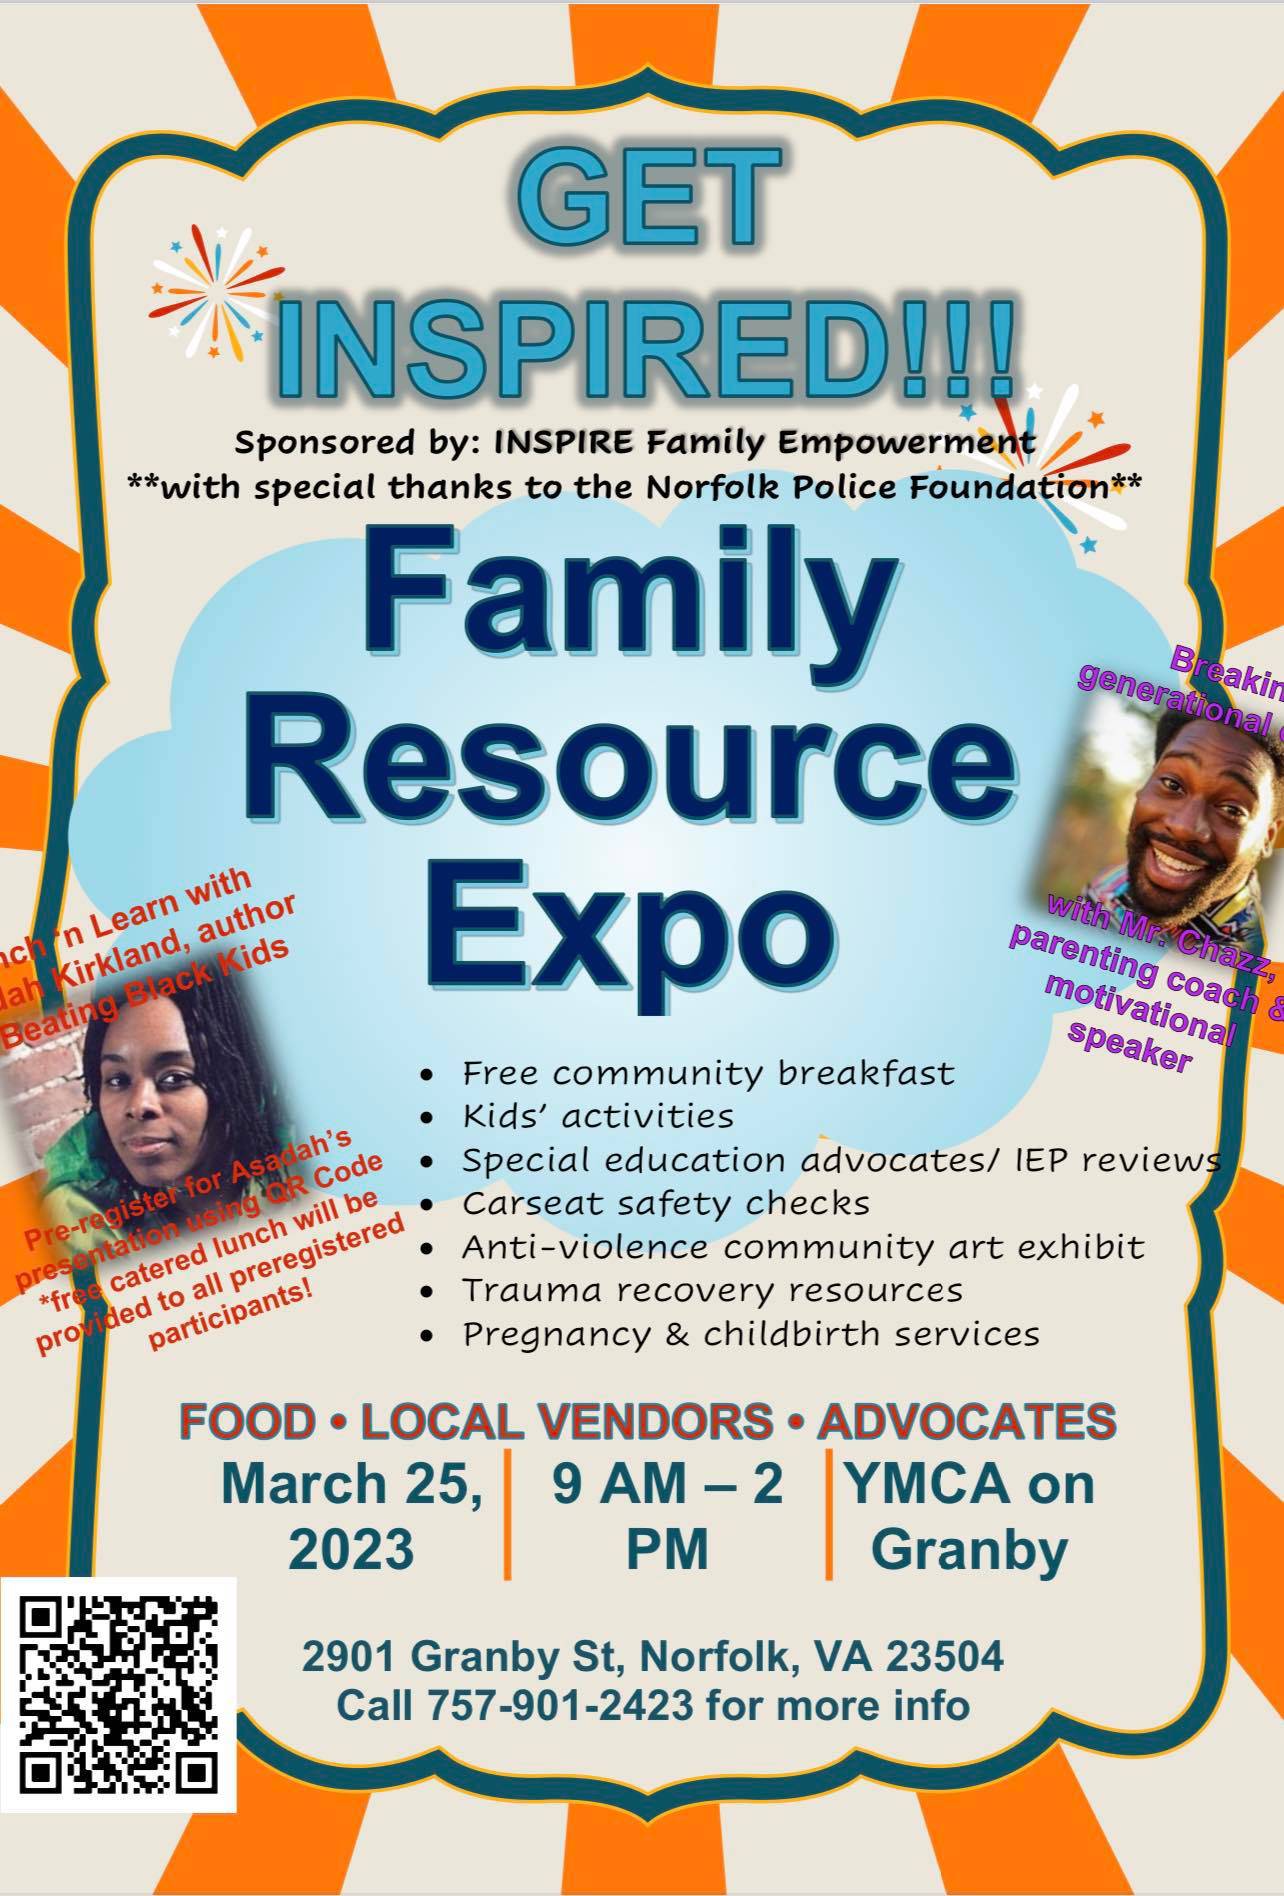 INSPIRE Family Empowerment set to host Family Resource Expo Saturday